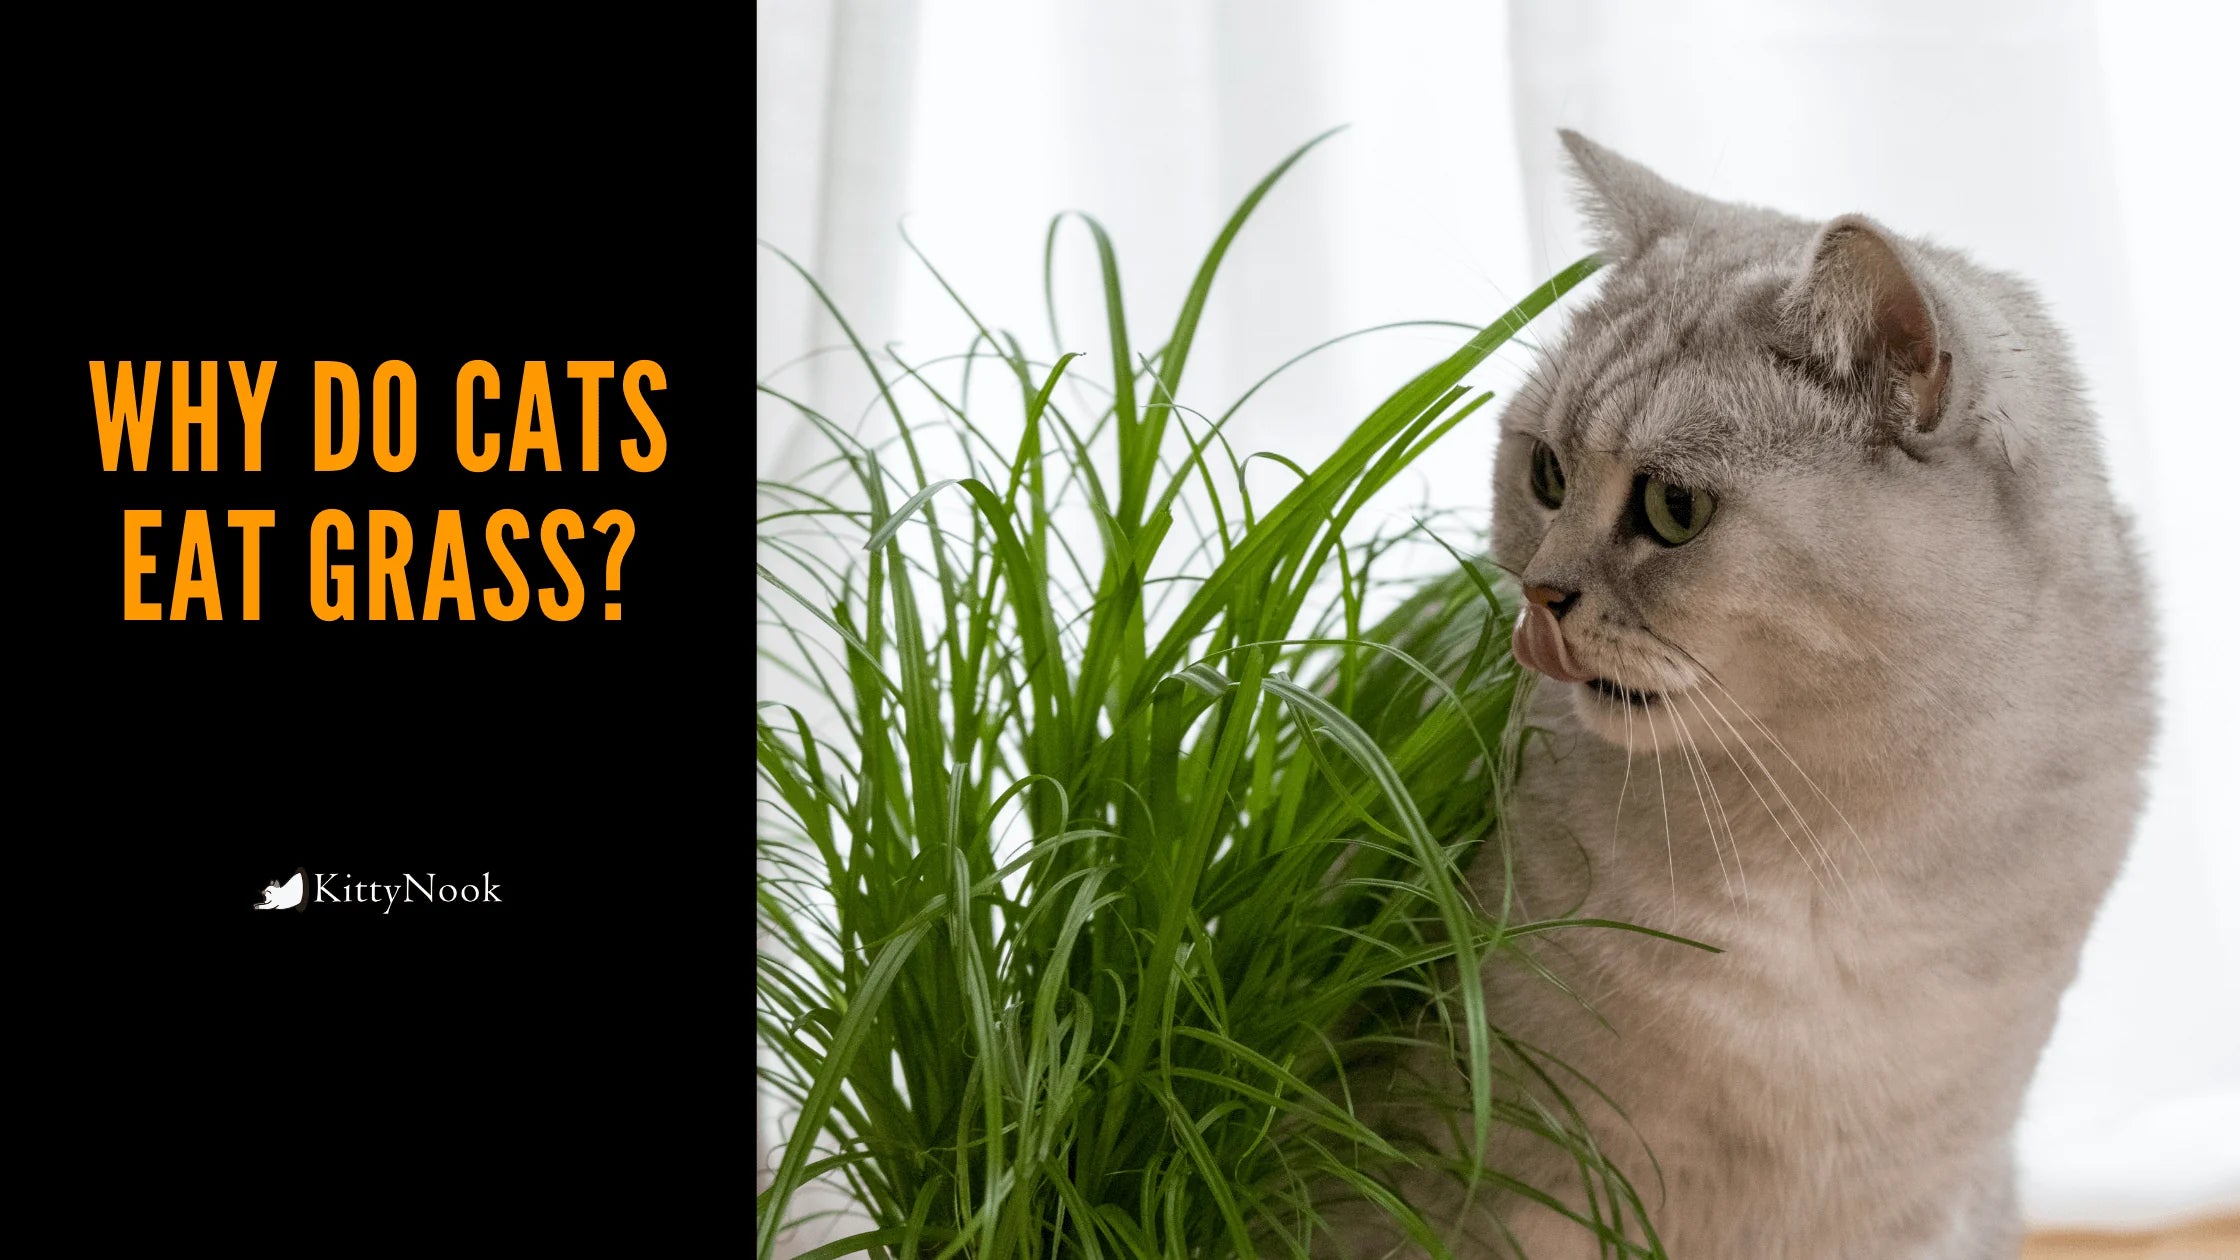 Is The Enigma Finally Solved? Why Do Cats Eat Grass? - KittyNook Cat Company